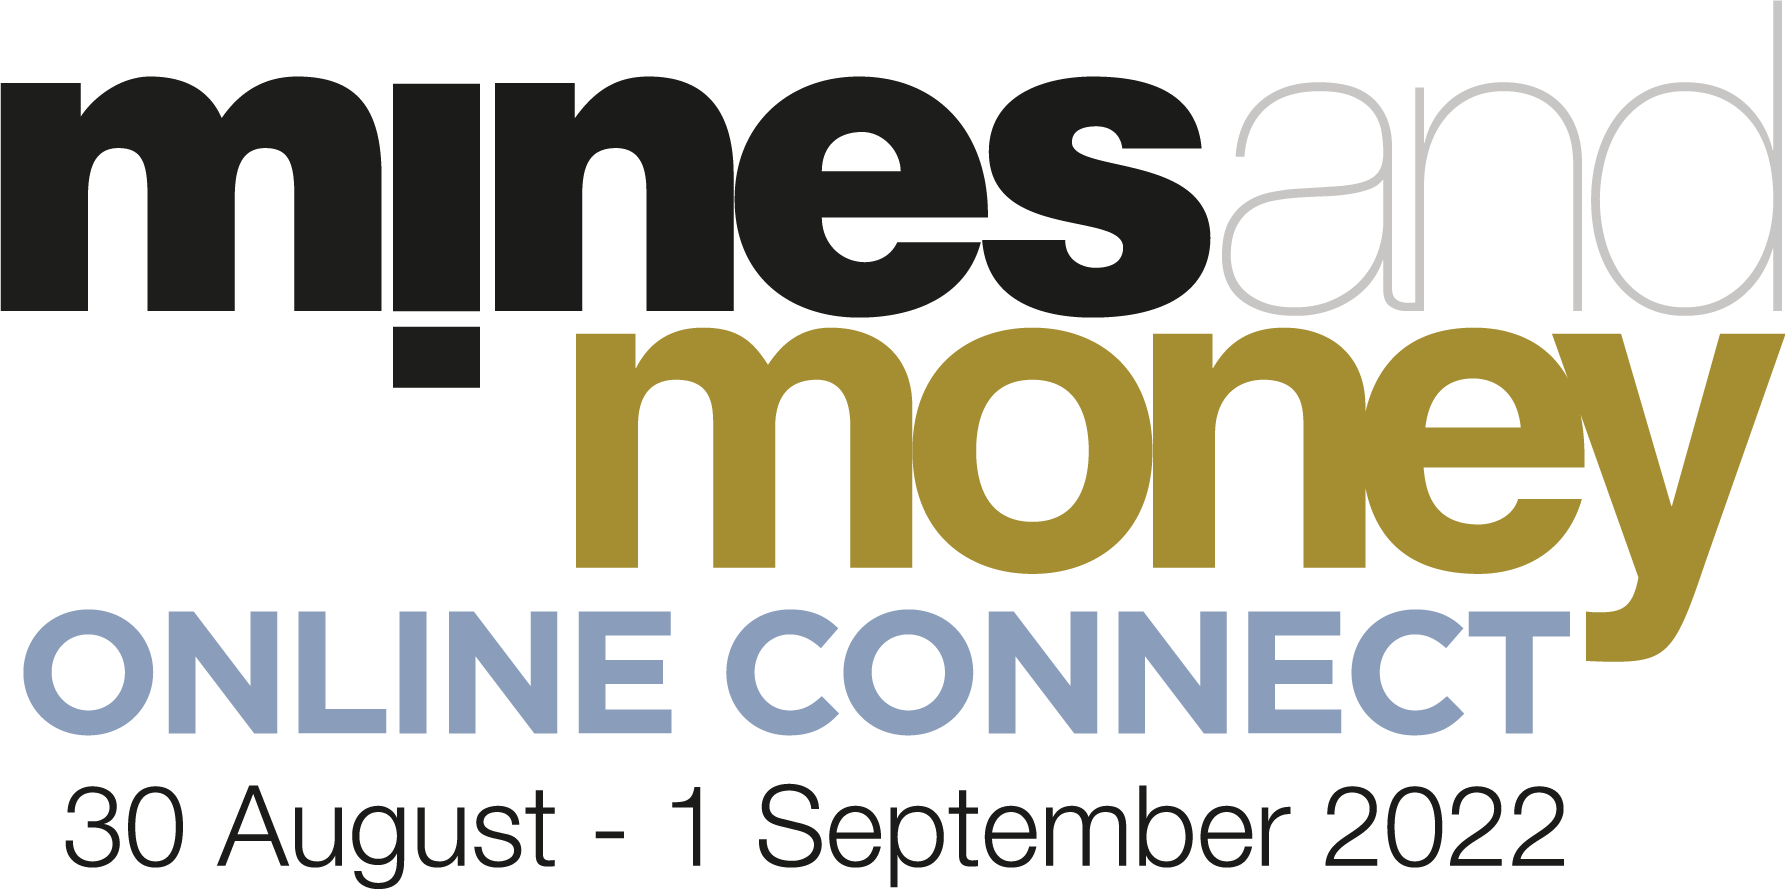 Mines and Money Online Connect - August 2022 organized by Mines and Money